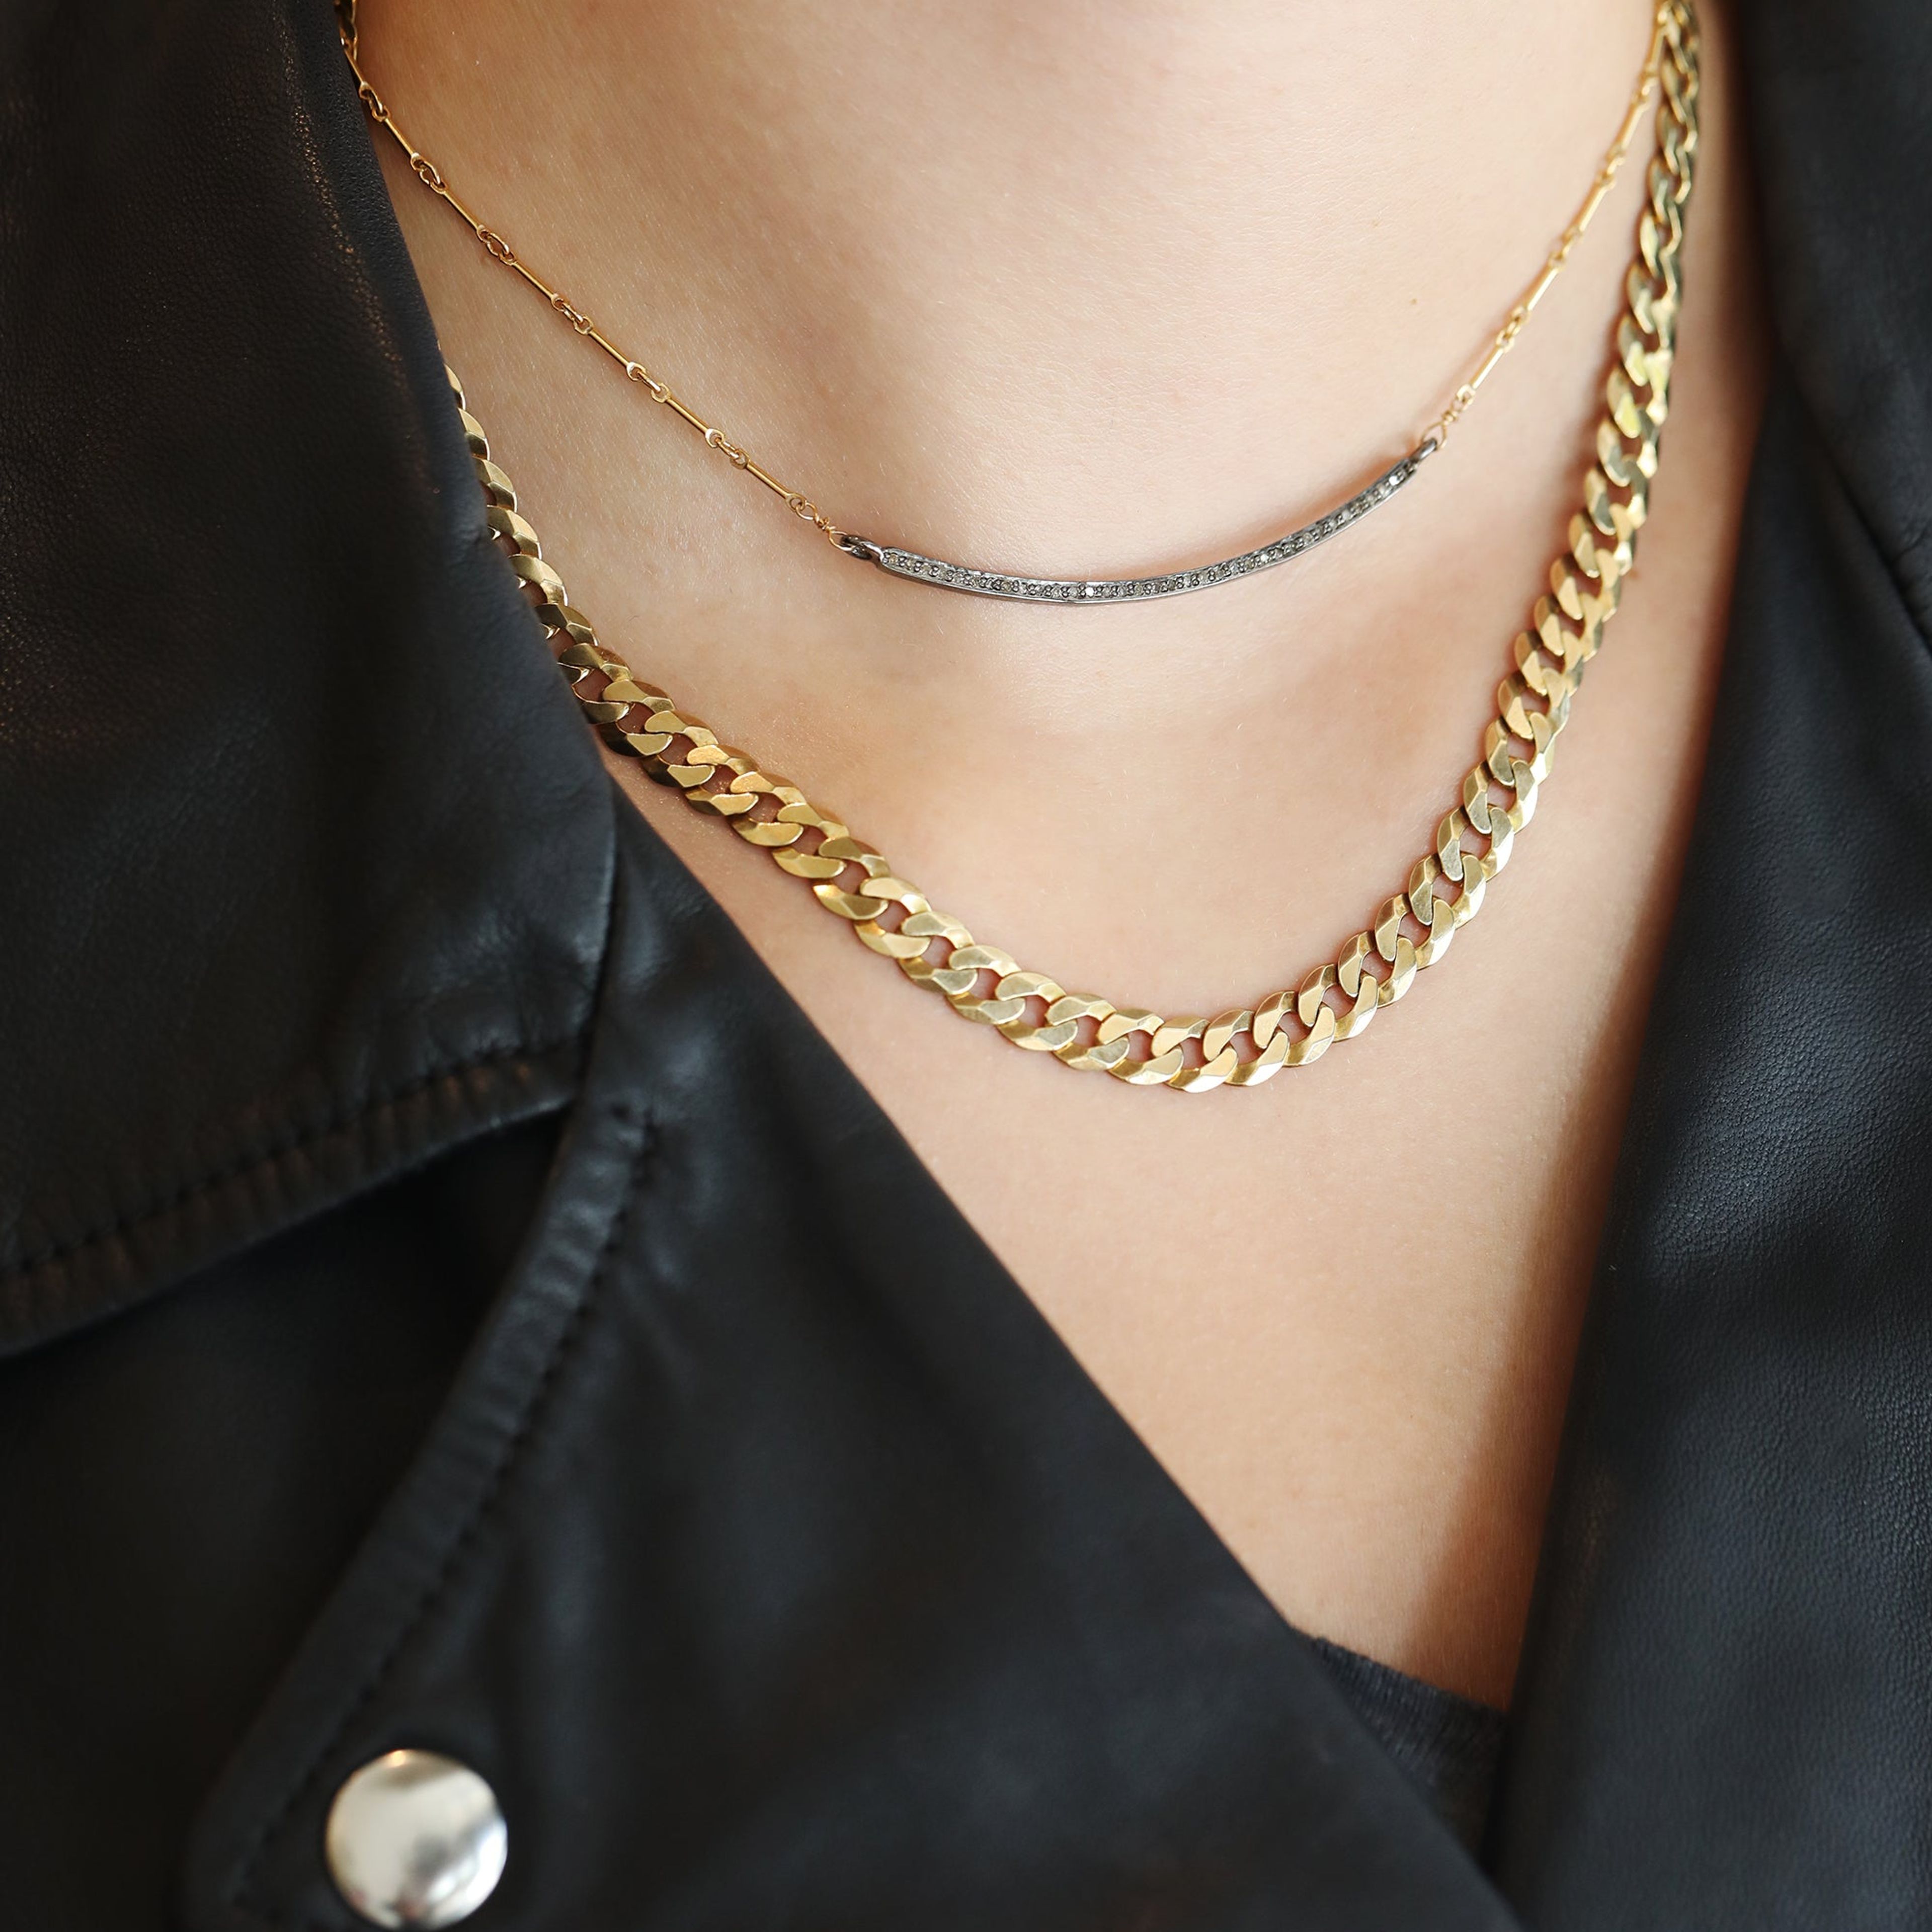 The Lina Necklace - Oxidized Bar on Gold Bar Chain